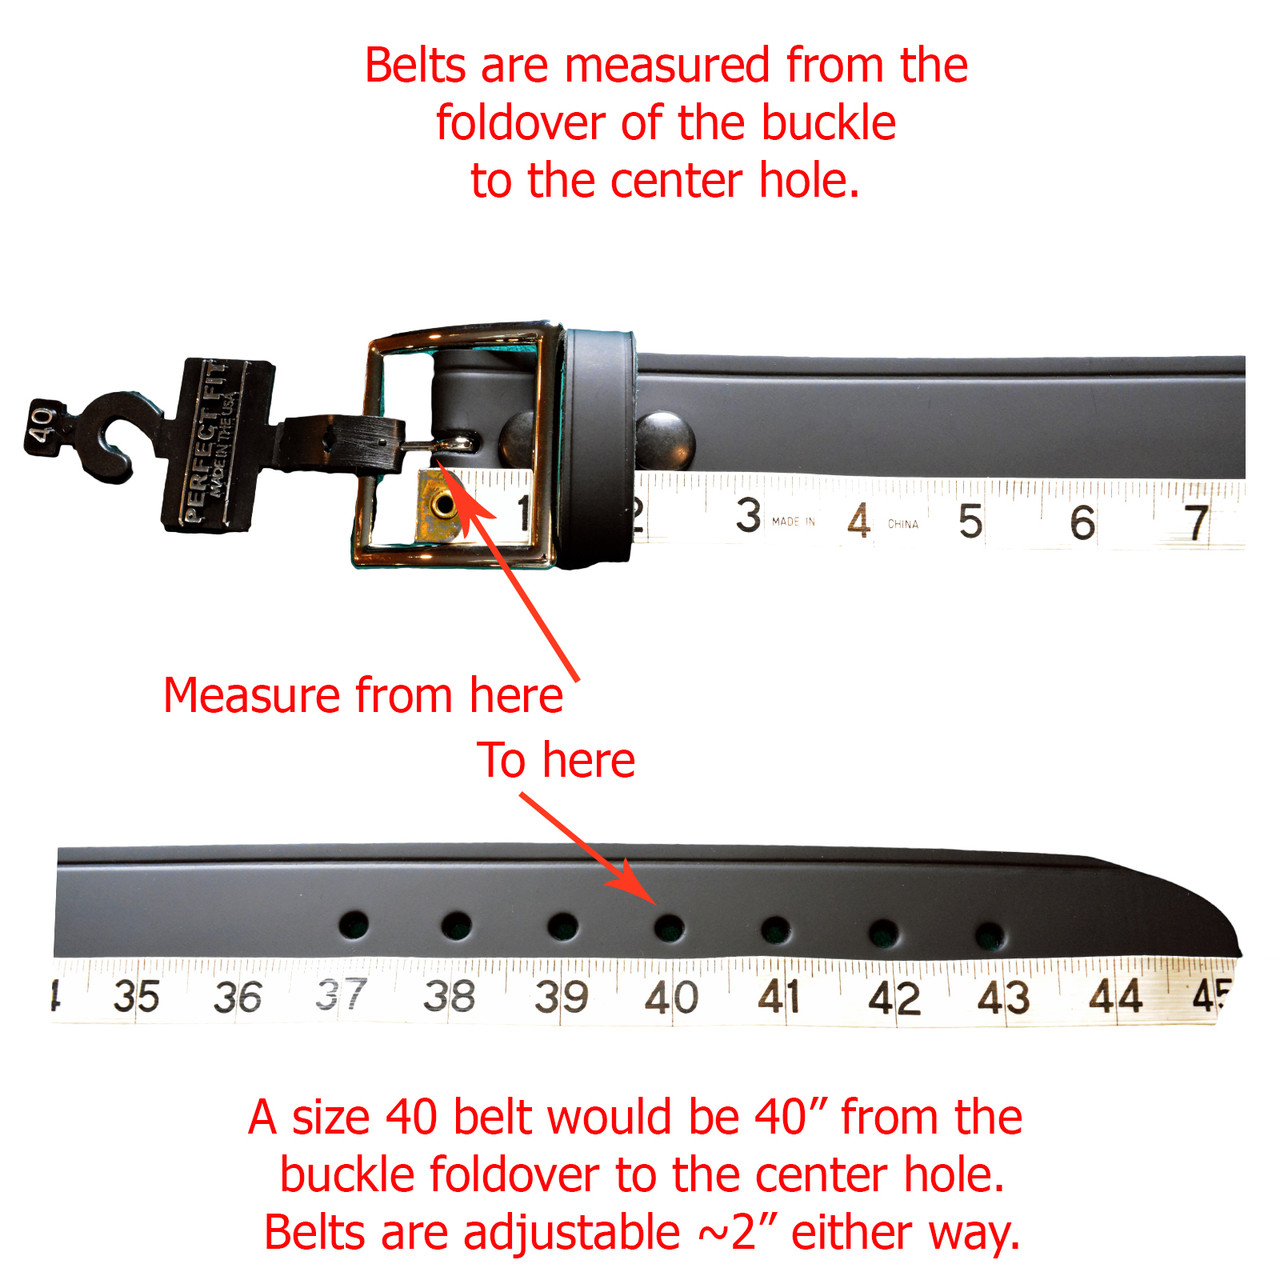 How to Get Your Perfect Size Belt – A Practical Guide for Men